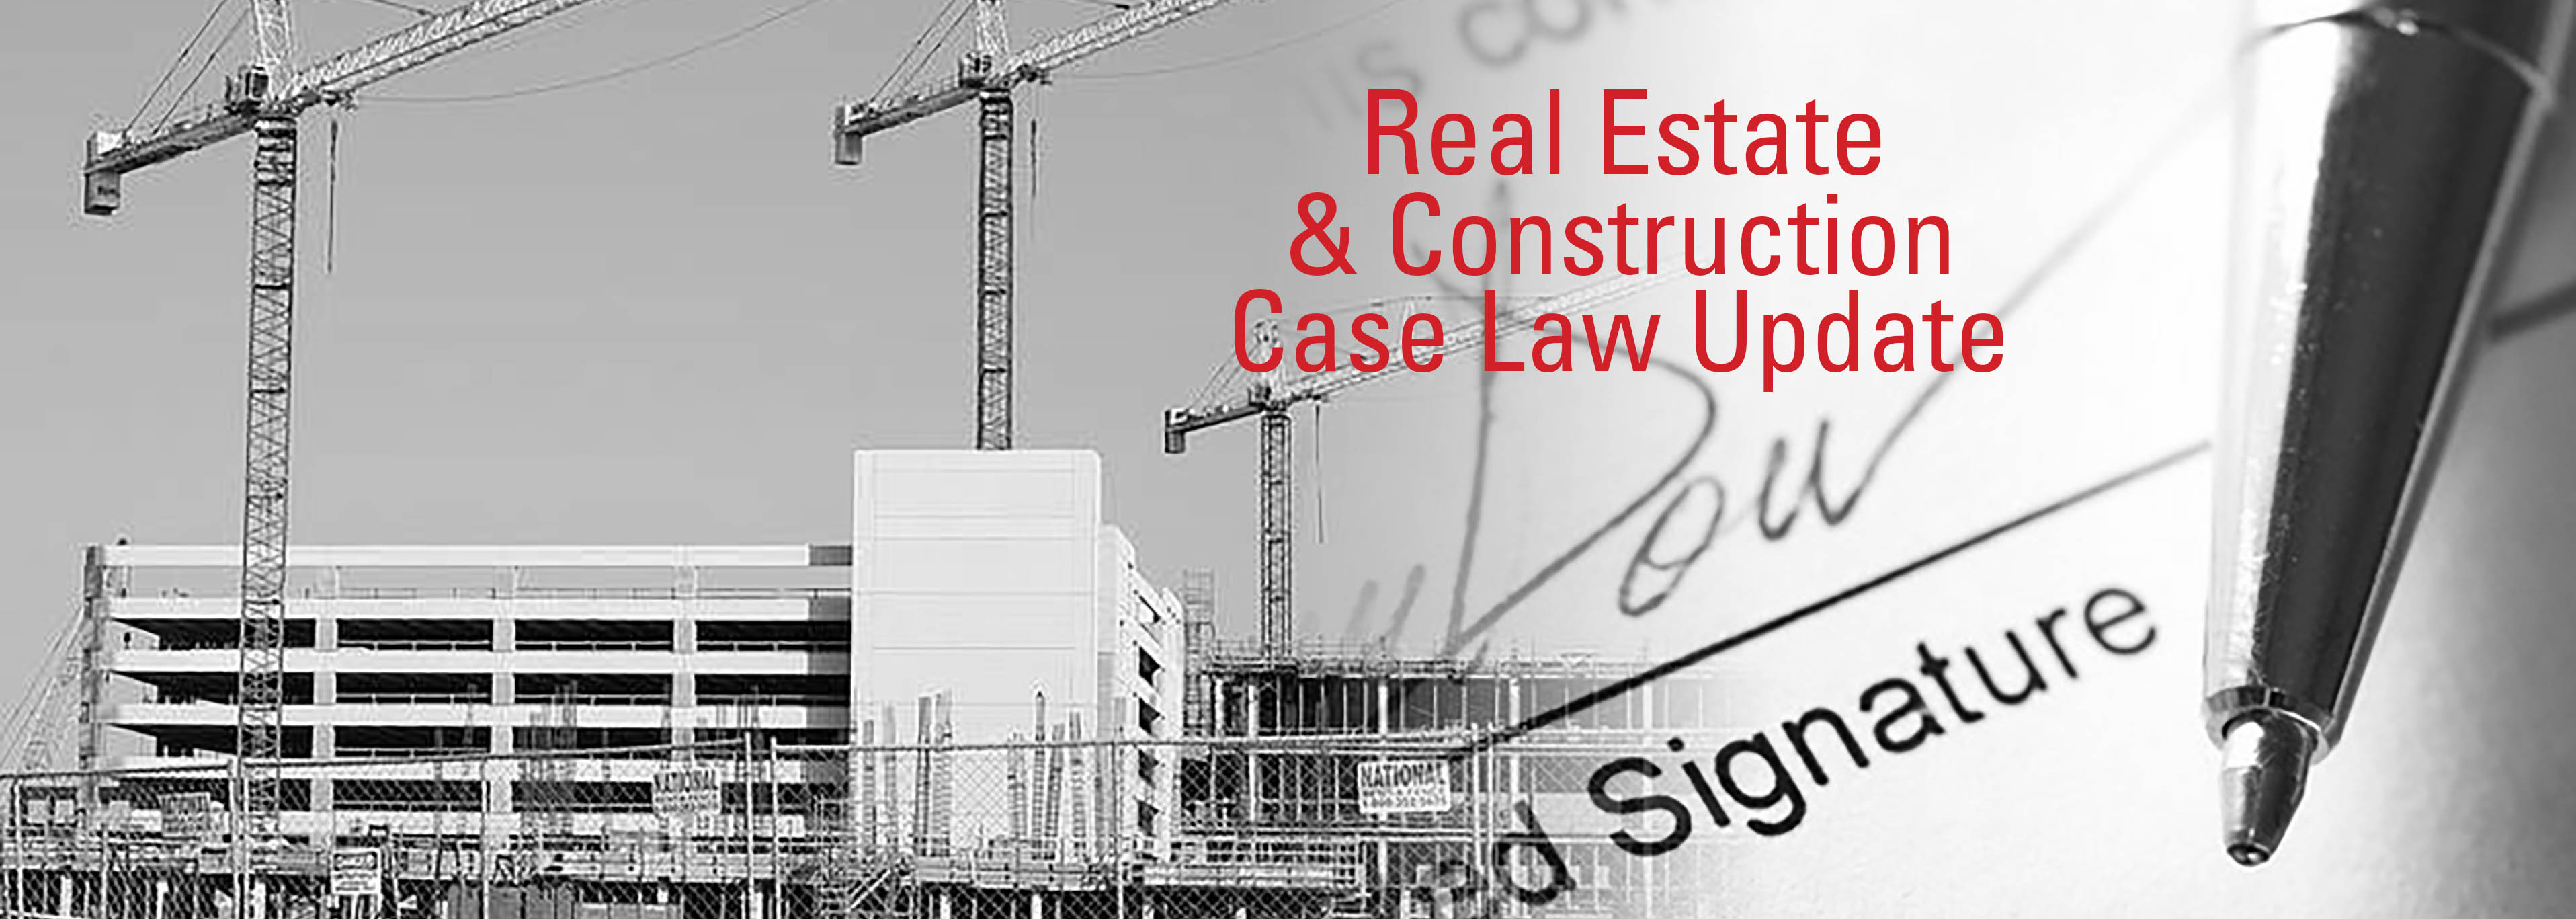 Real Estate Case Law Update